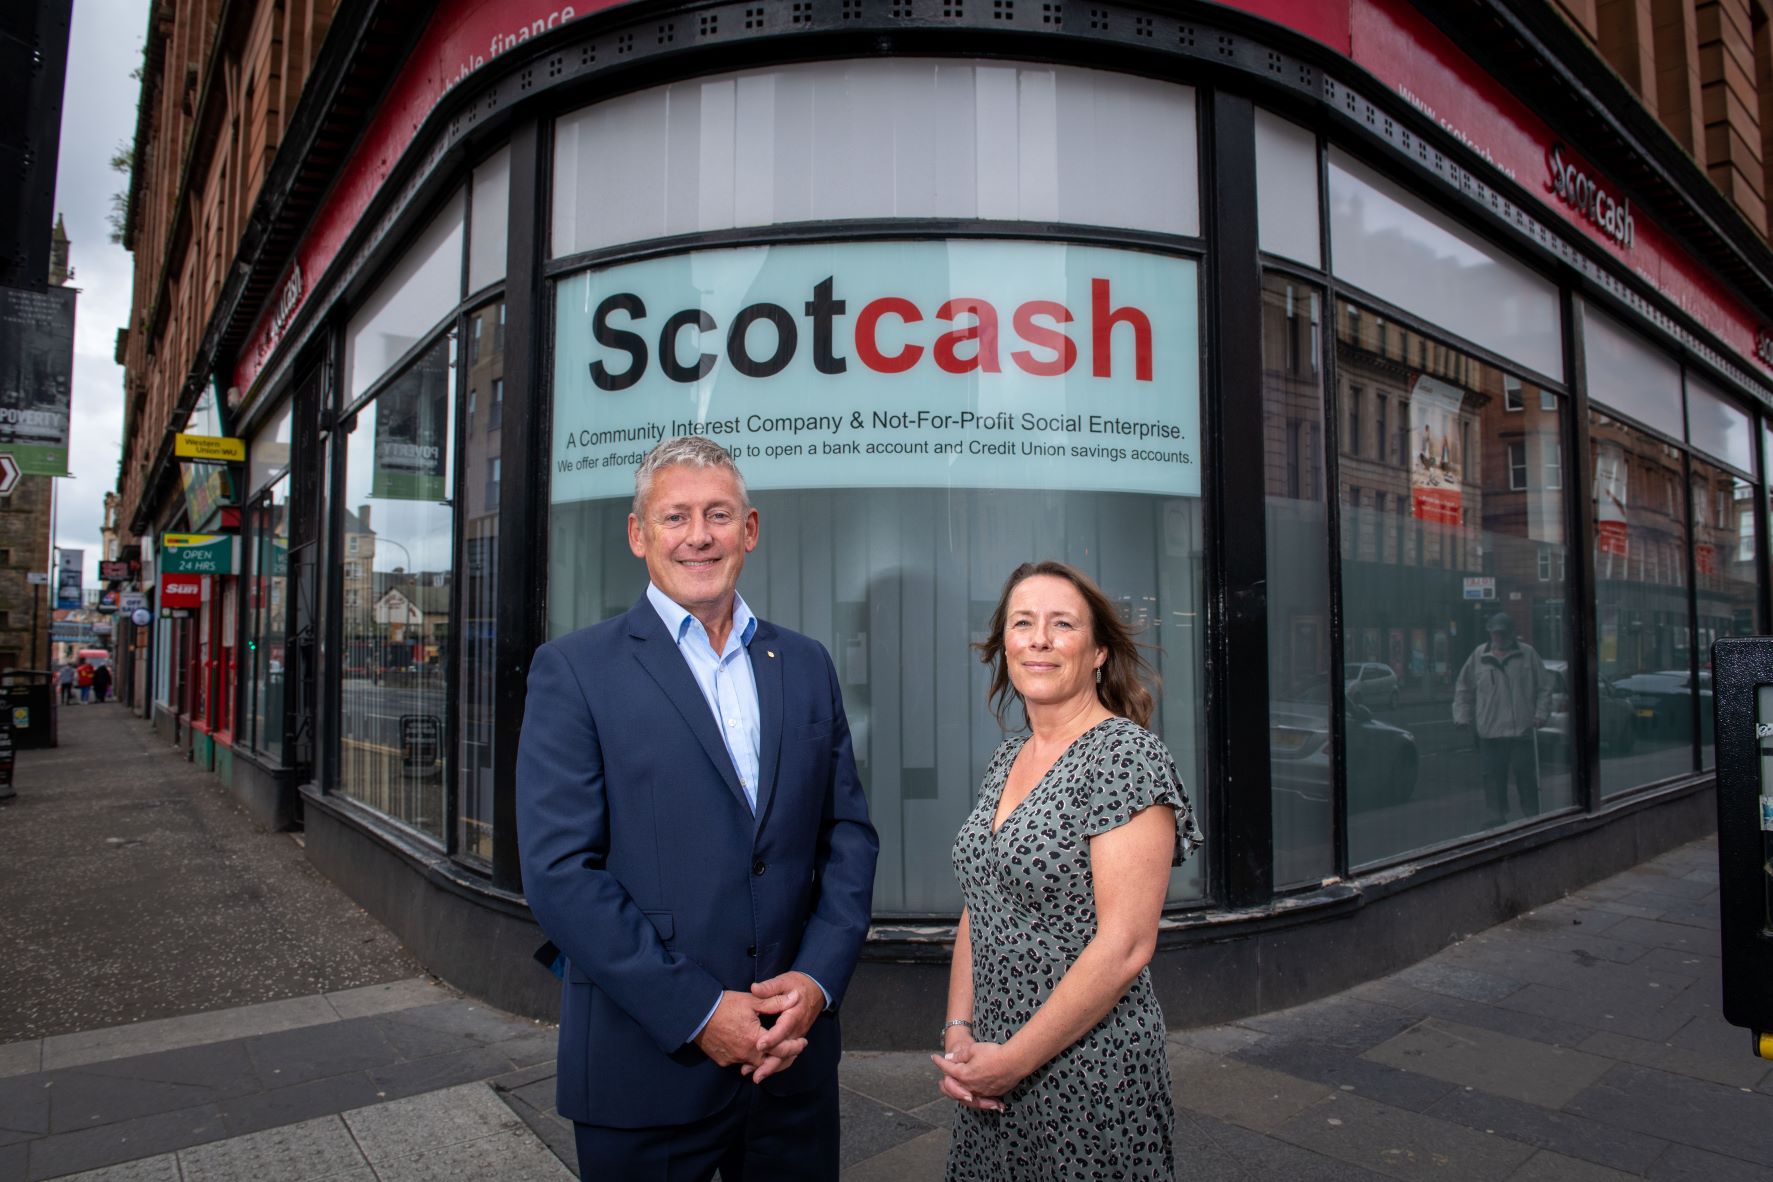 New organisation to provide access to fair and affordable financial services